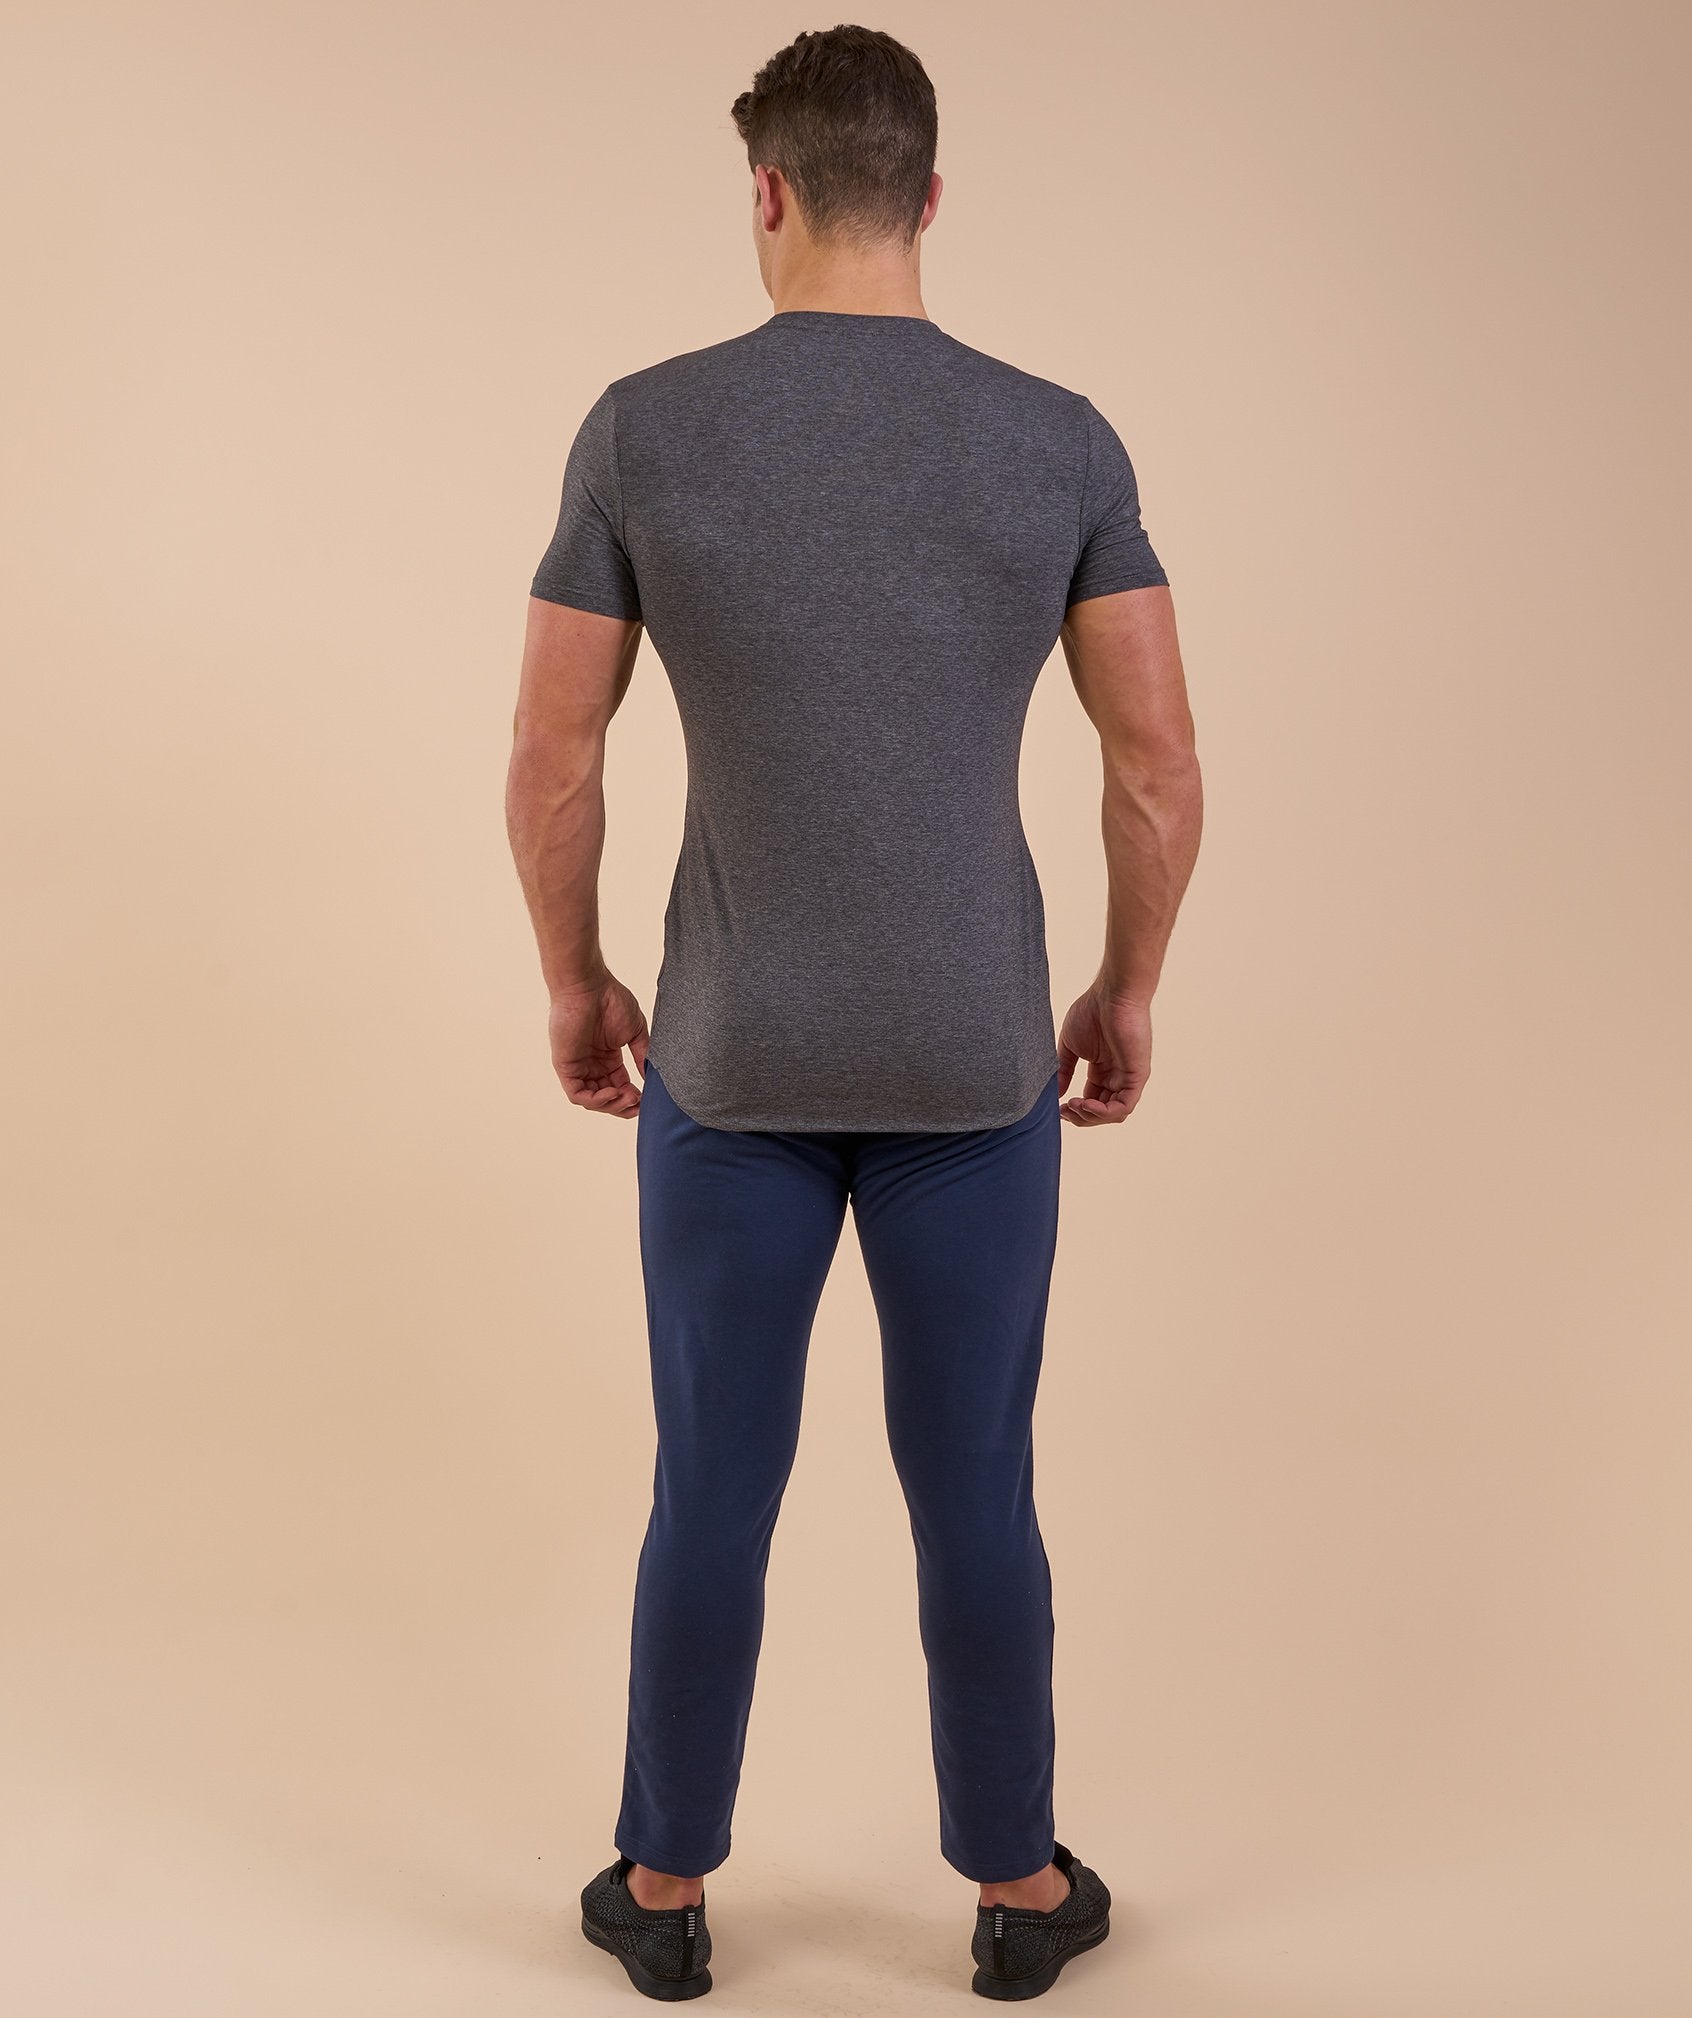 Solace Longline T-Shirt in Charcoal Marl - view 3